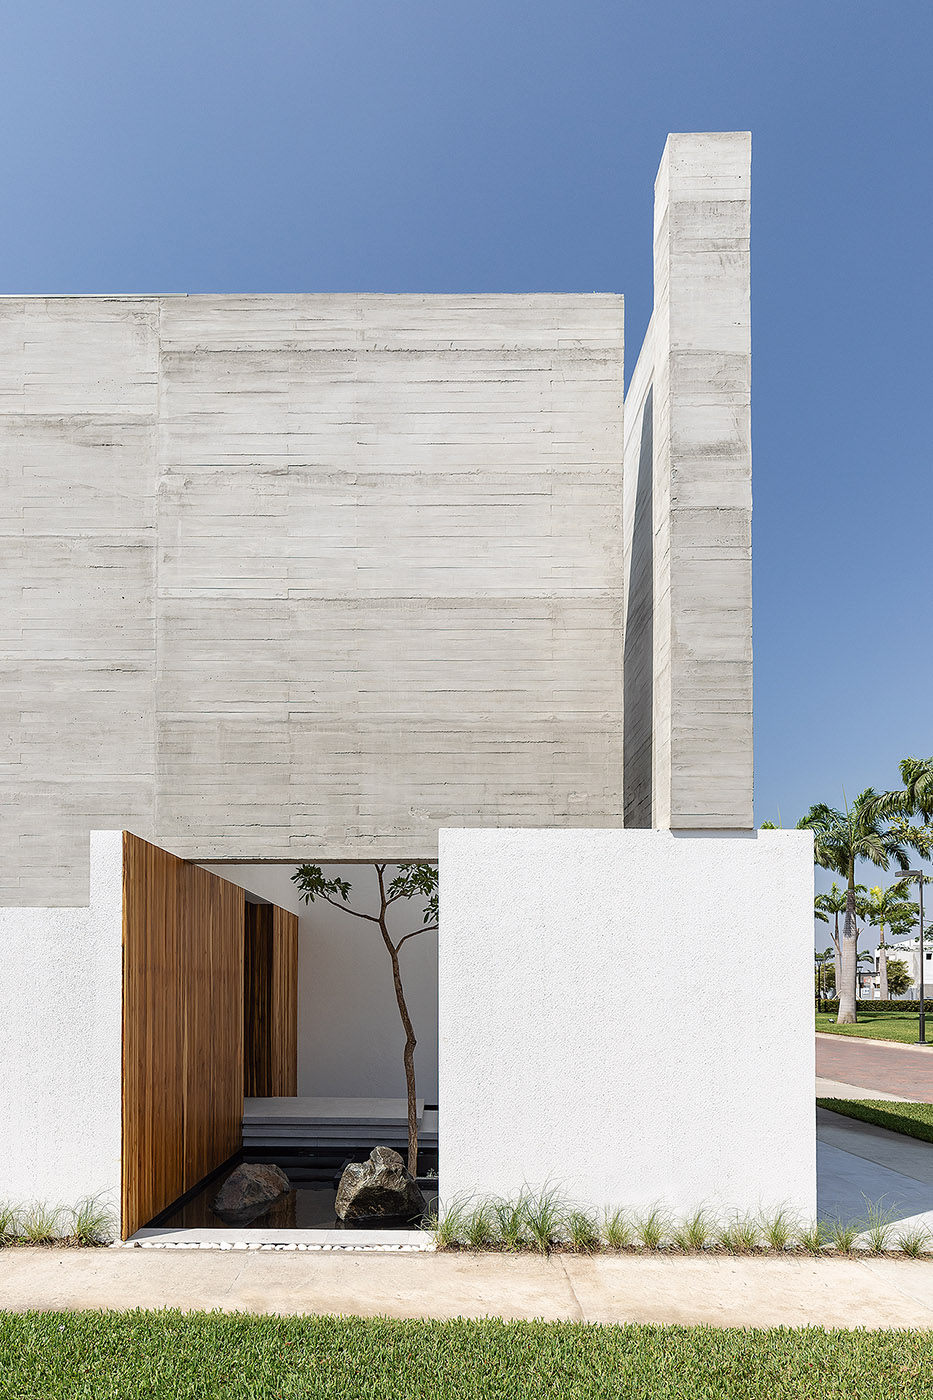 Casa Mocoli: a fascinating sculpture with purist lines for an encounter with yourself